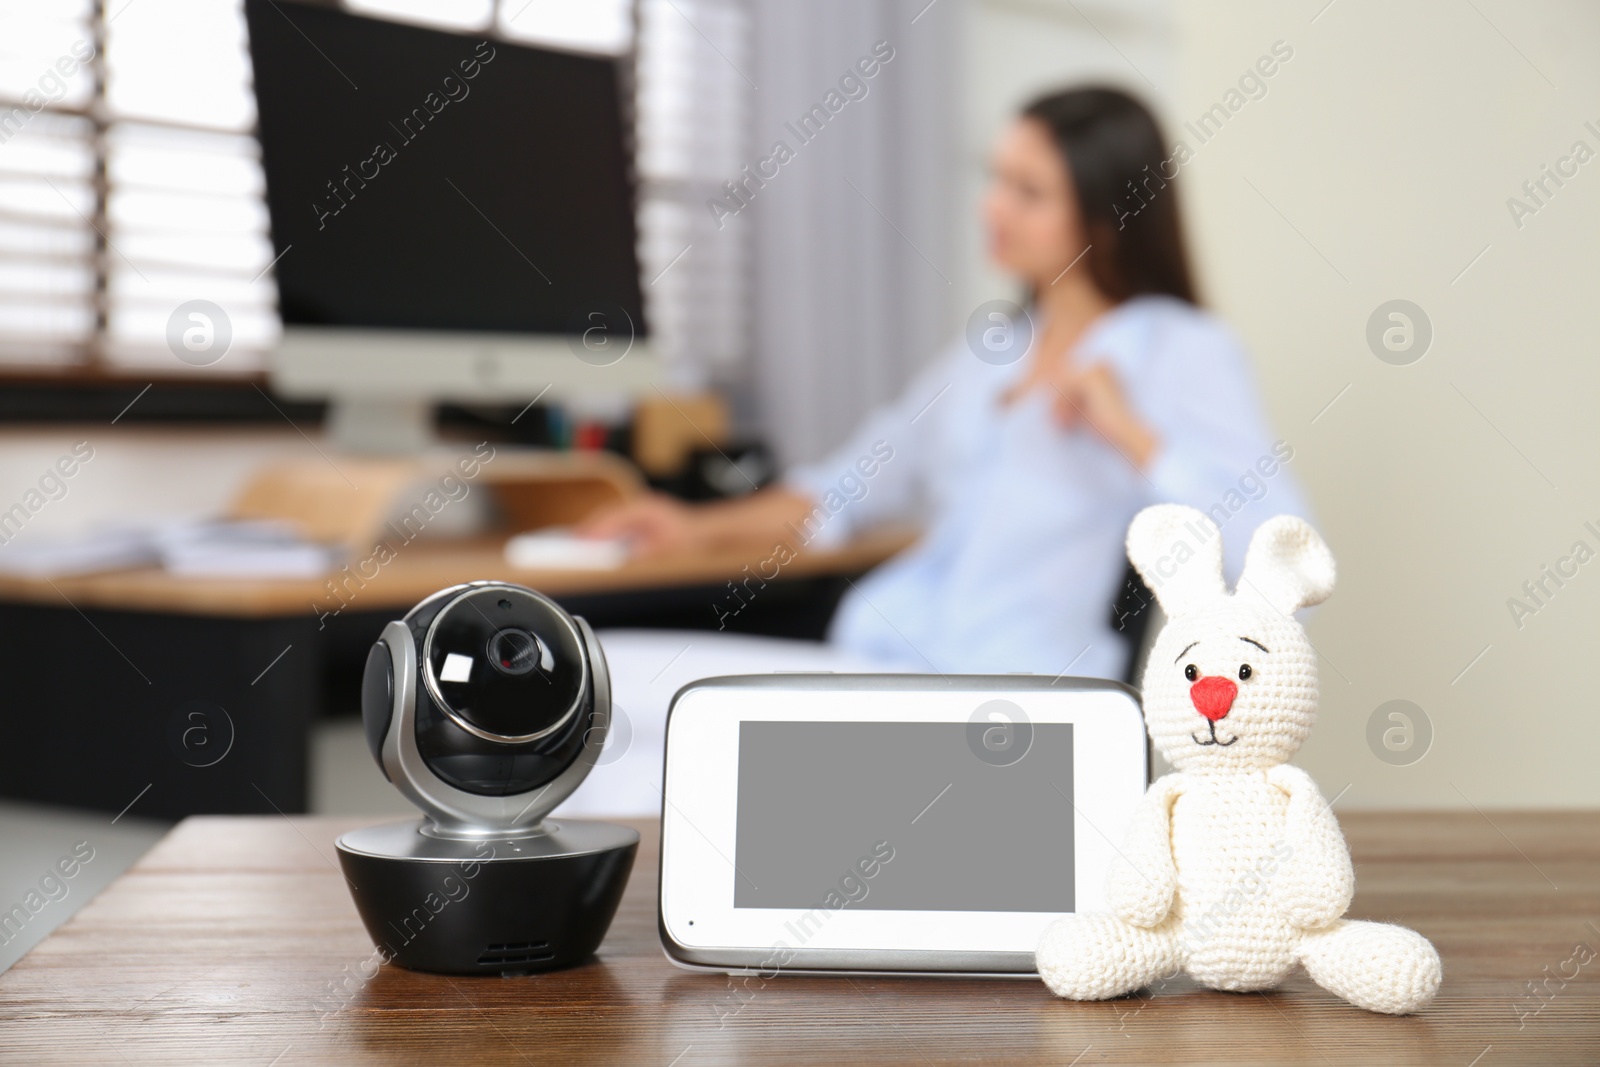 Photo of Baby monitor, camera with toy on table and woman working in home office. Video nanny